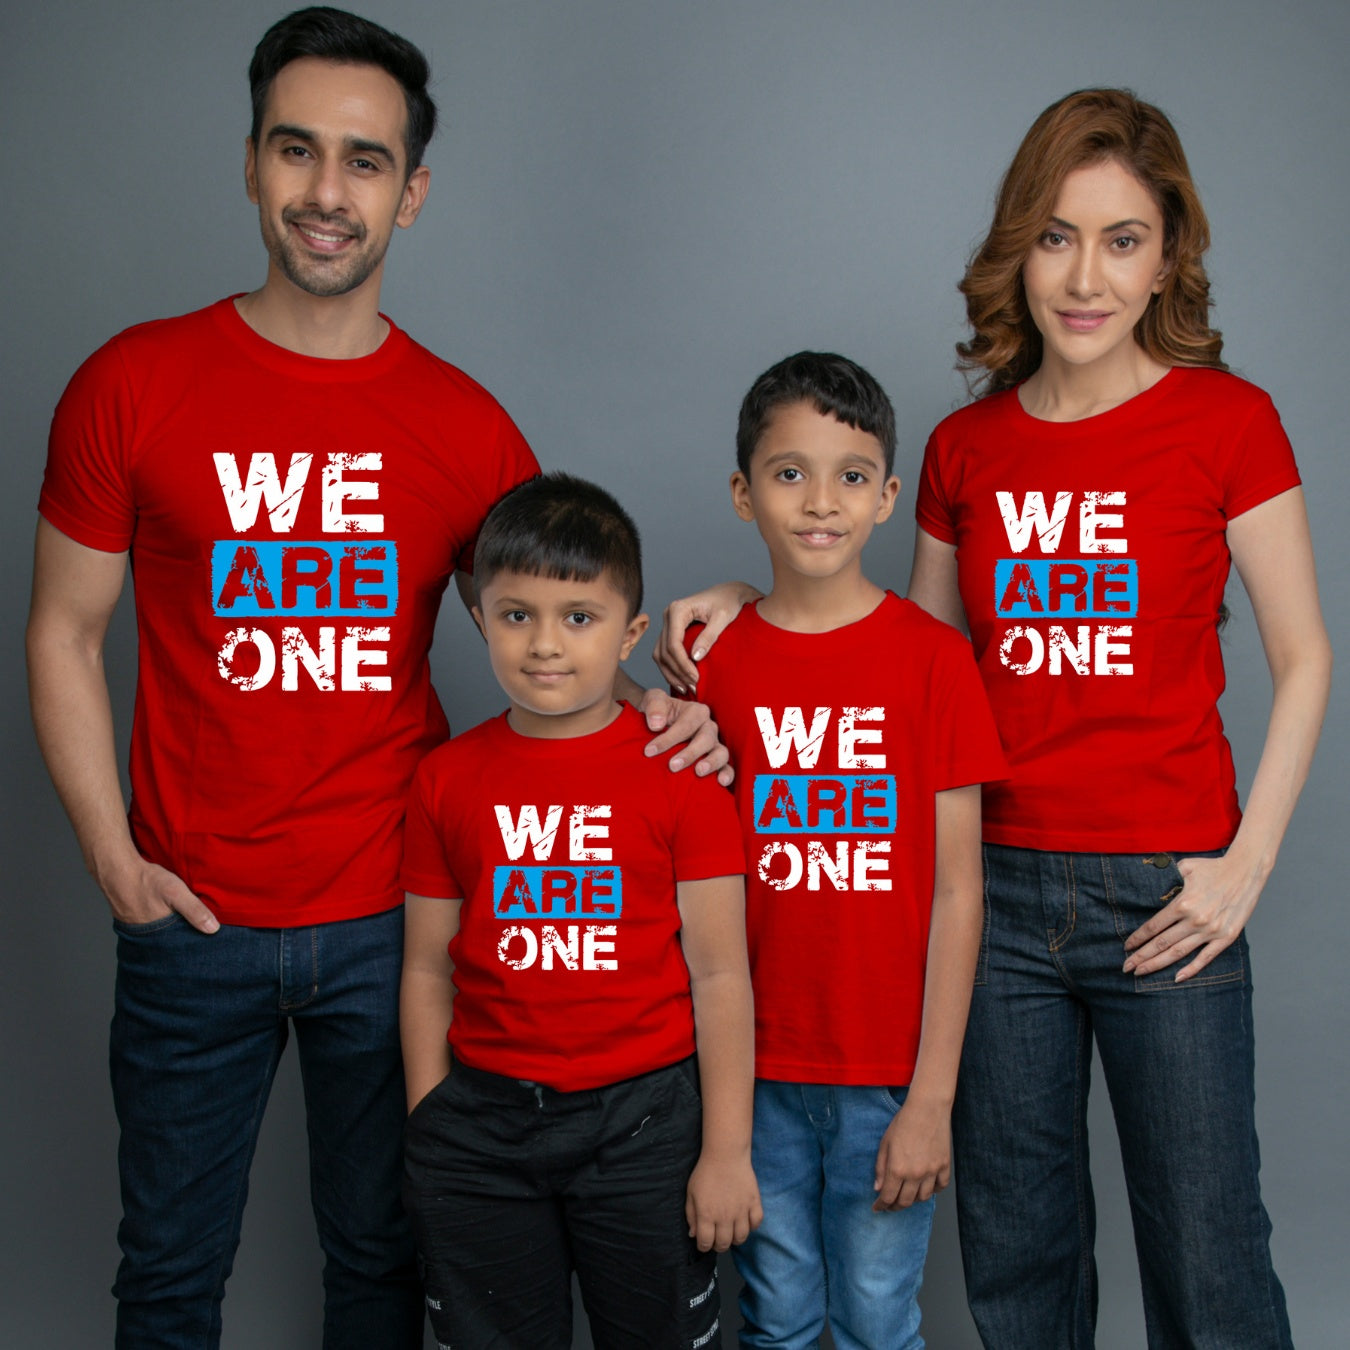 Family t shirts set of 4 Mom Dad Two Sons in Red Colour - We Are One Variant